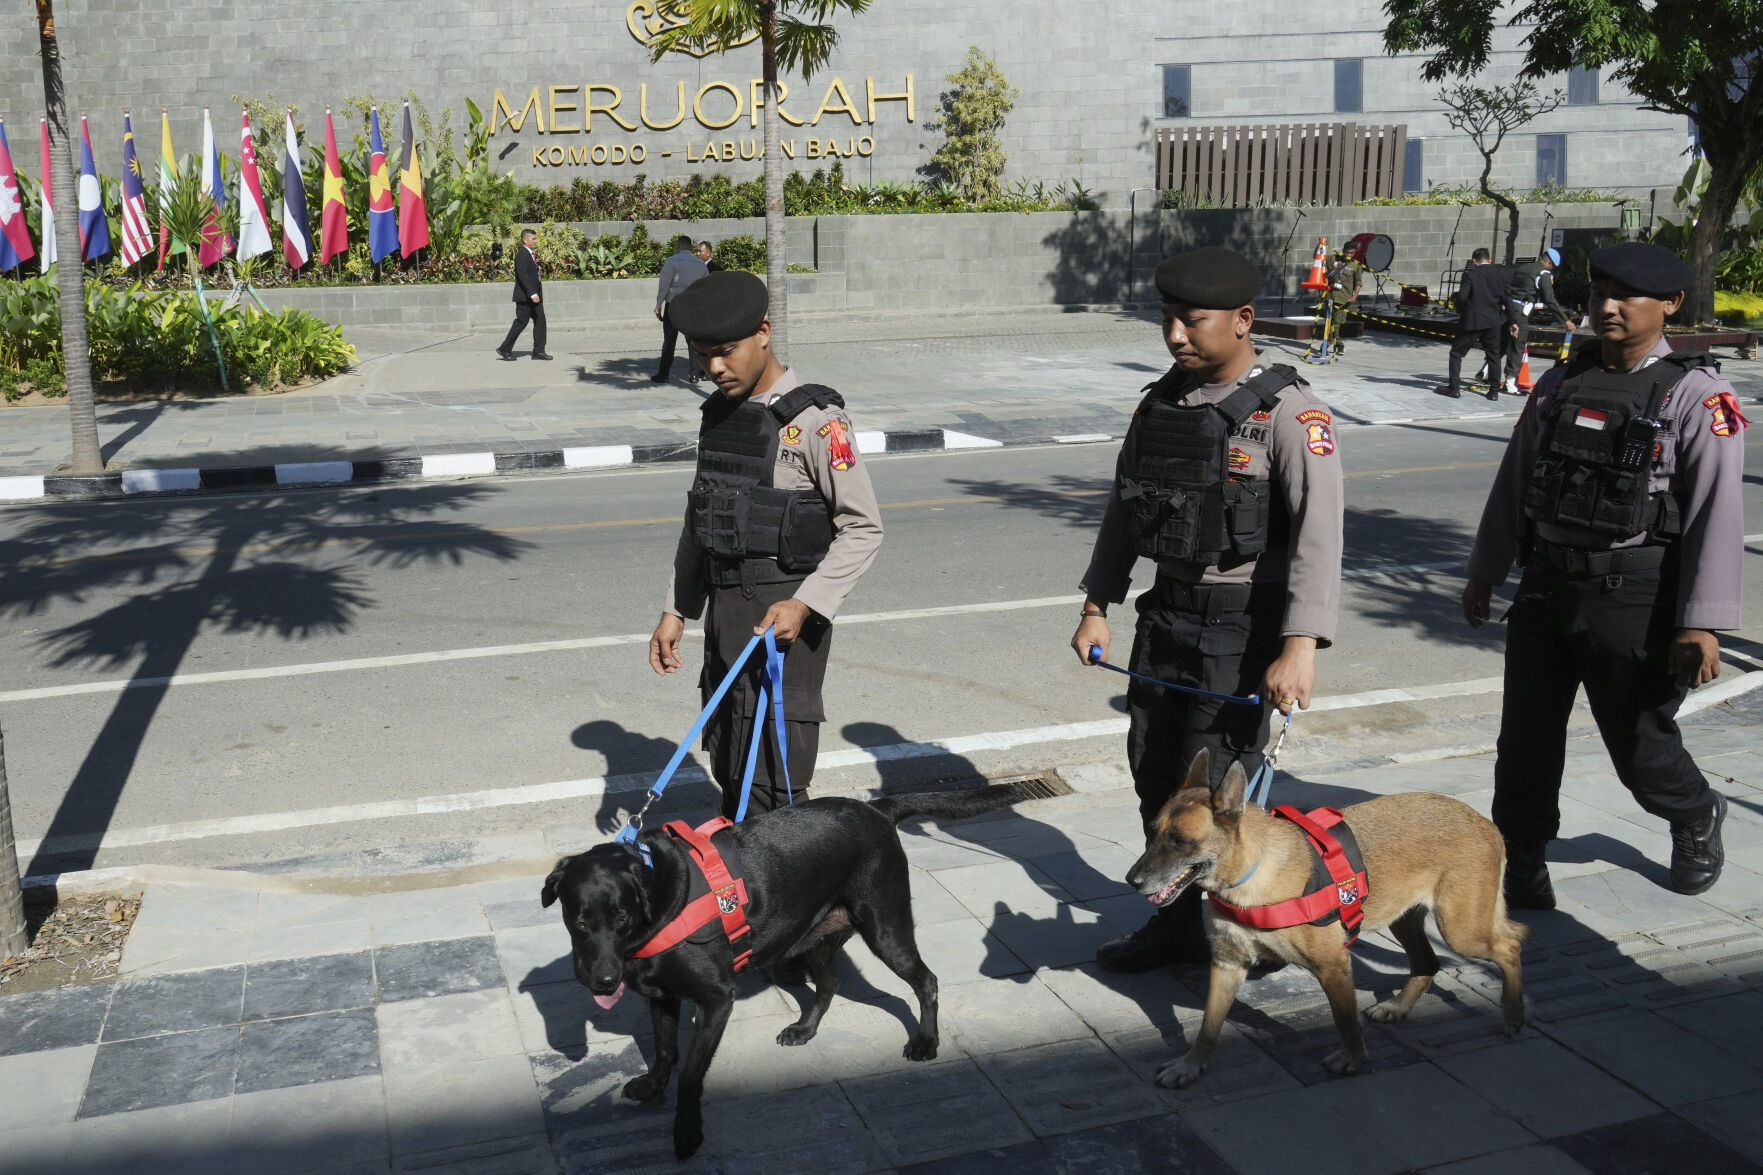 <p>Indonesian police K9 patrol in front of Meruorah hotel in Labuan Bajo, East Nusa Tenggara province, Indonesia, Monday, May 8, 2023. Indonesian President Joko Widodo will host fellow leaders of the Association of Southeast Asian Nations this week in their annual summit in Labuan Bajo. (AP Photo/Achmad Ibrahim)</p>   PHOTO CREDIT: Achmad Ibrahim 